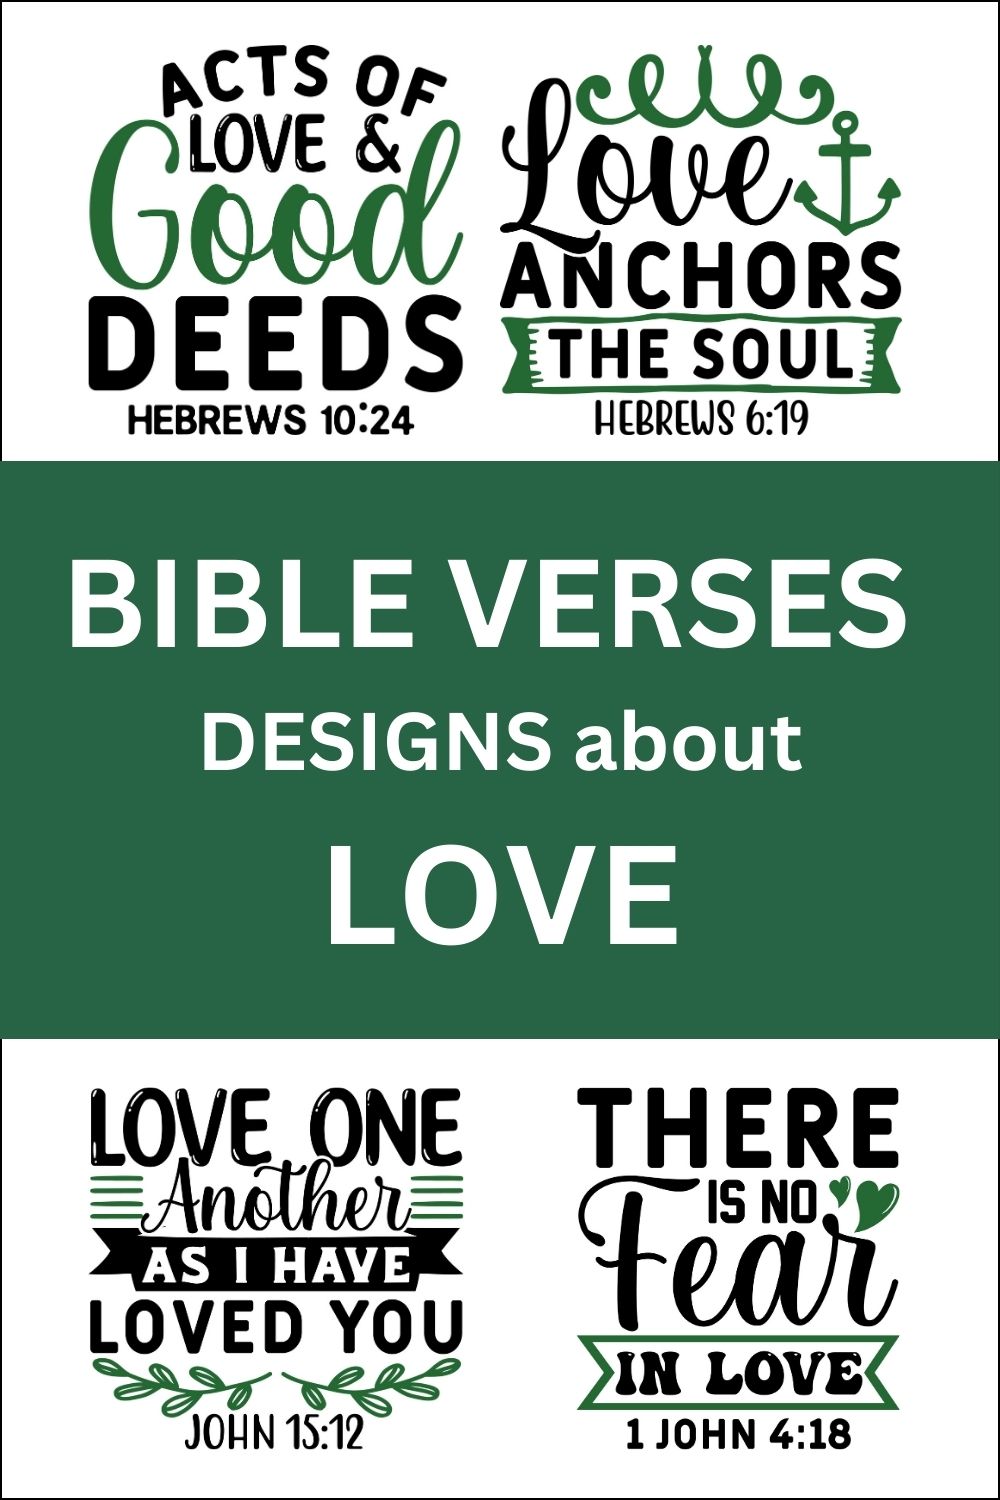 Free printable bundle of Bible Verses about Love, scripture passages, Cricut designs, DIY patterns, svg files, templates, clip art, stencils, silhouette, embroidery, cut files, design space, vector, crafts, laser cutting, and DIY crafts.